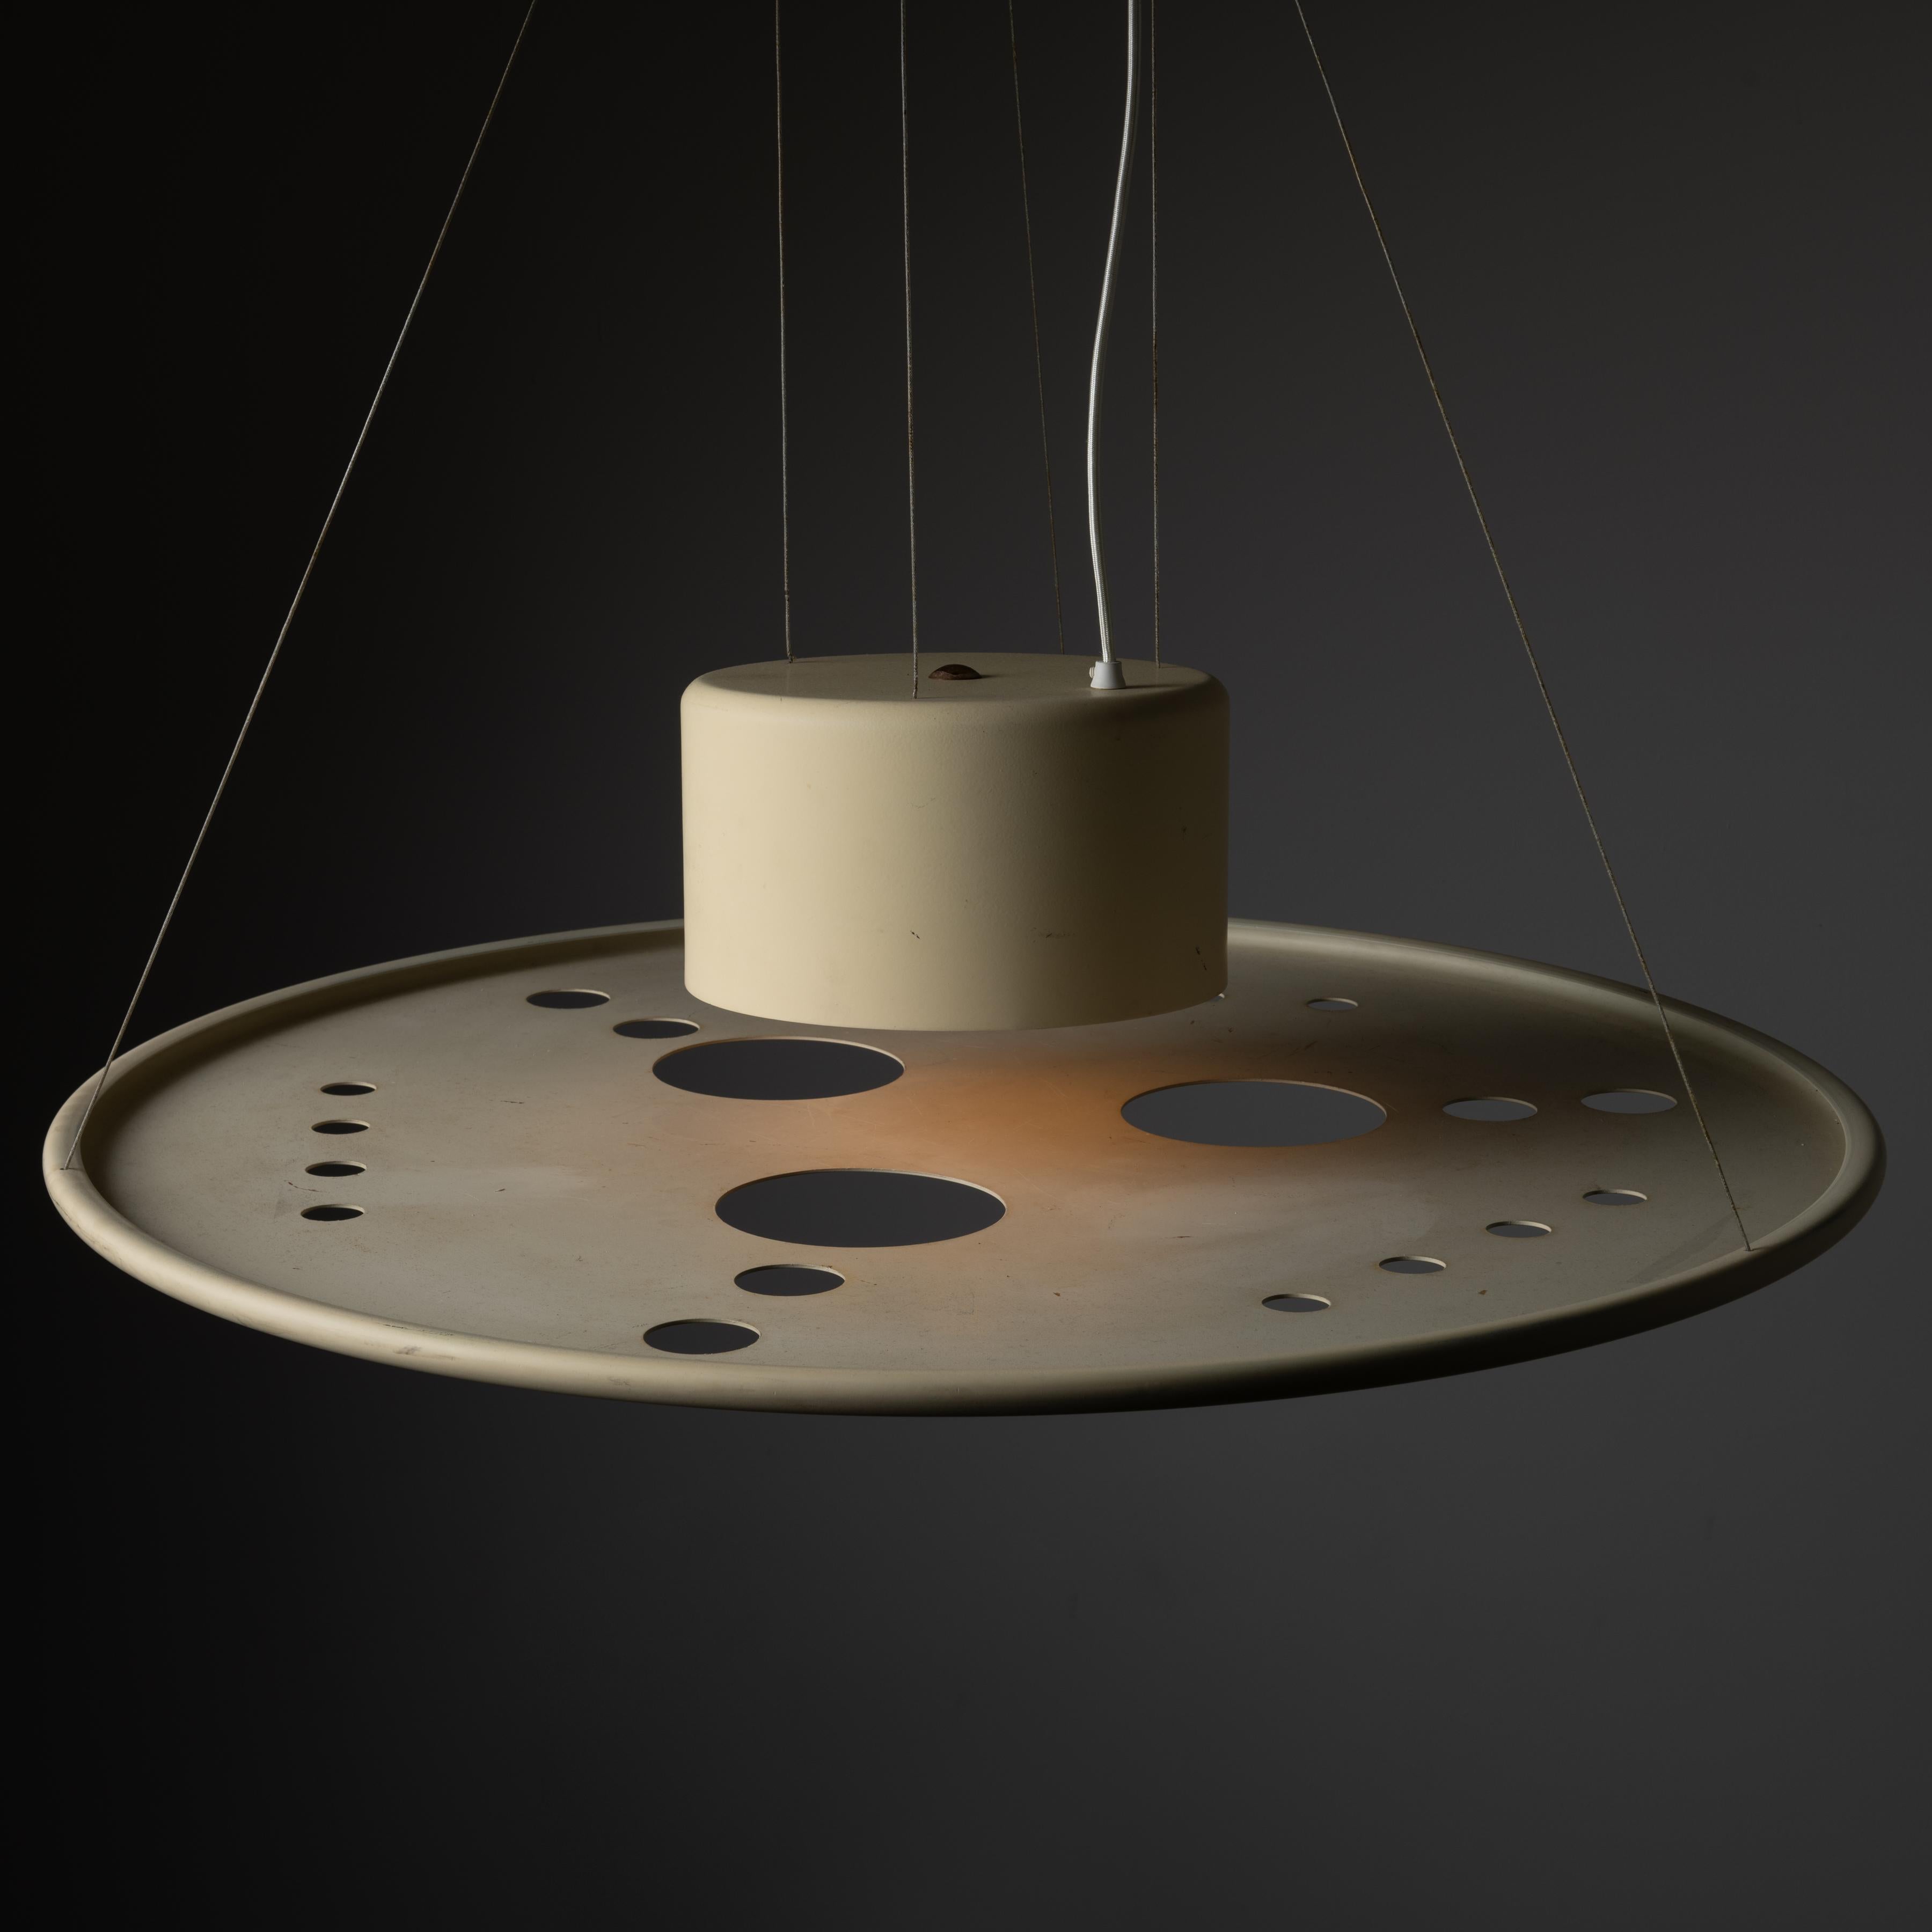 Rare Pendant by Giovanni Corradini and Giancarlo Simonetti. Designed and manufactured in Italy circa 1950s. Timeless and minimal ceiling light with suspended metal shade in an enameled cream that features abstracted circular die cuts providing an